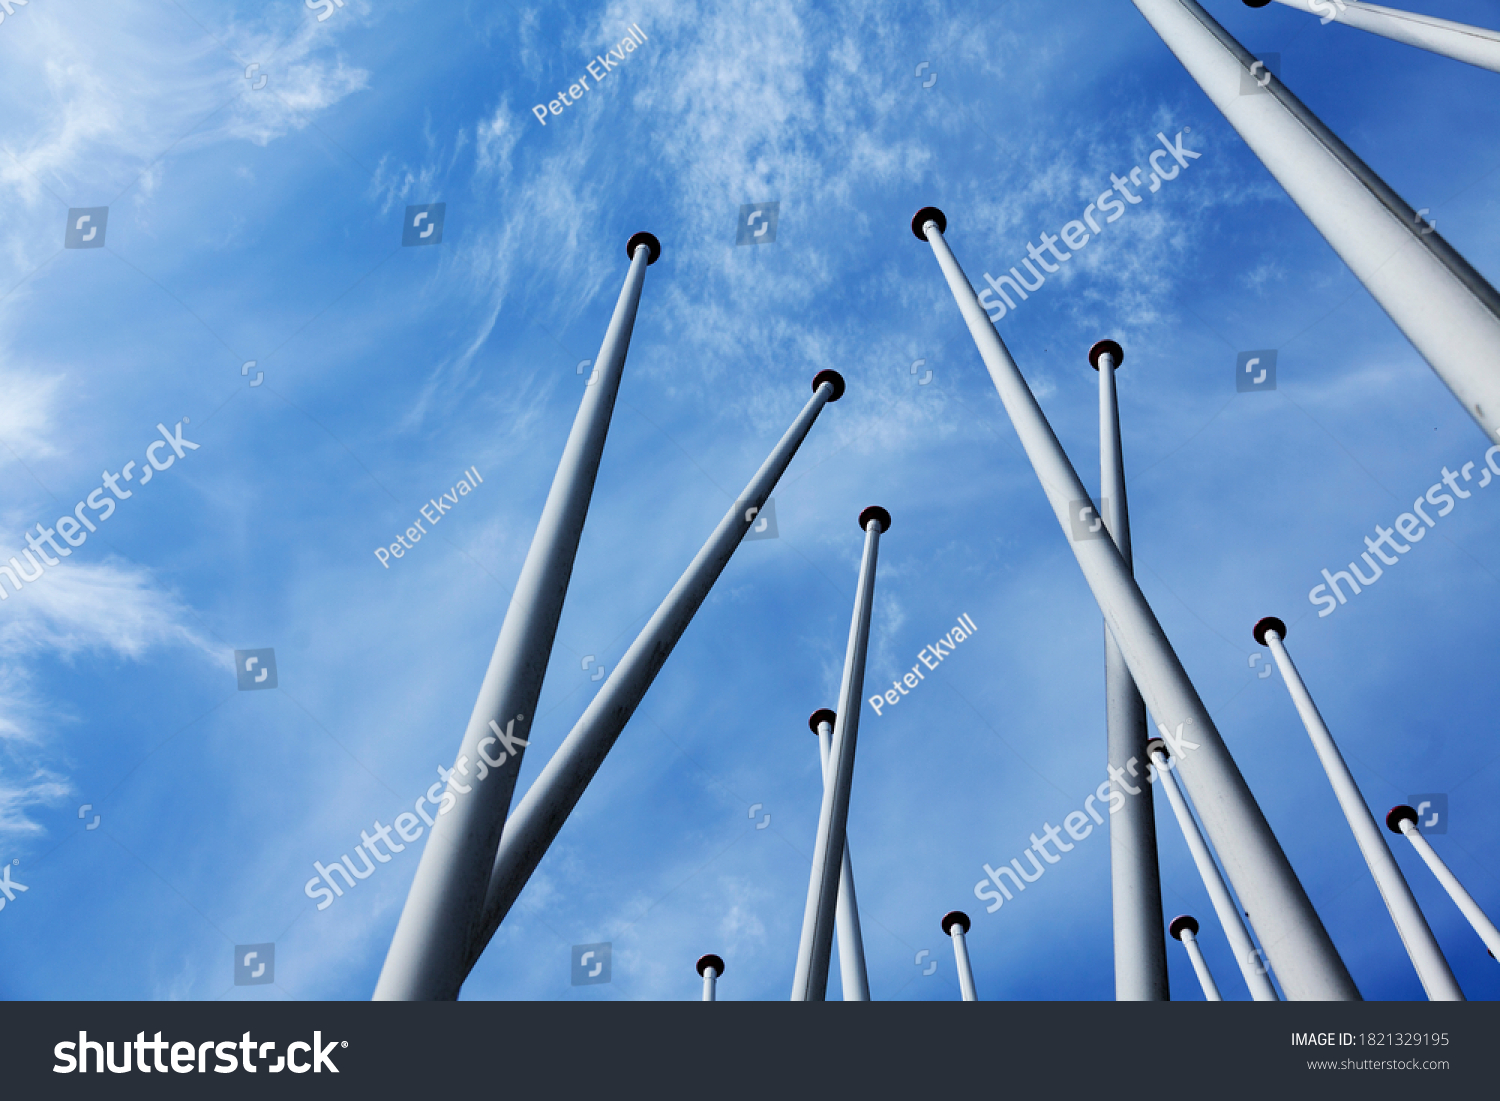 lots of empty flagpoles against a blue sky #1821329195